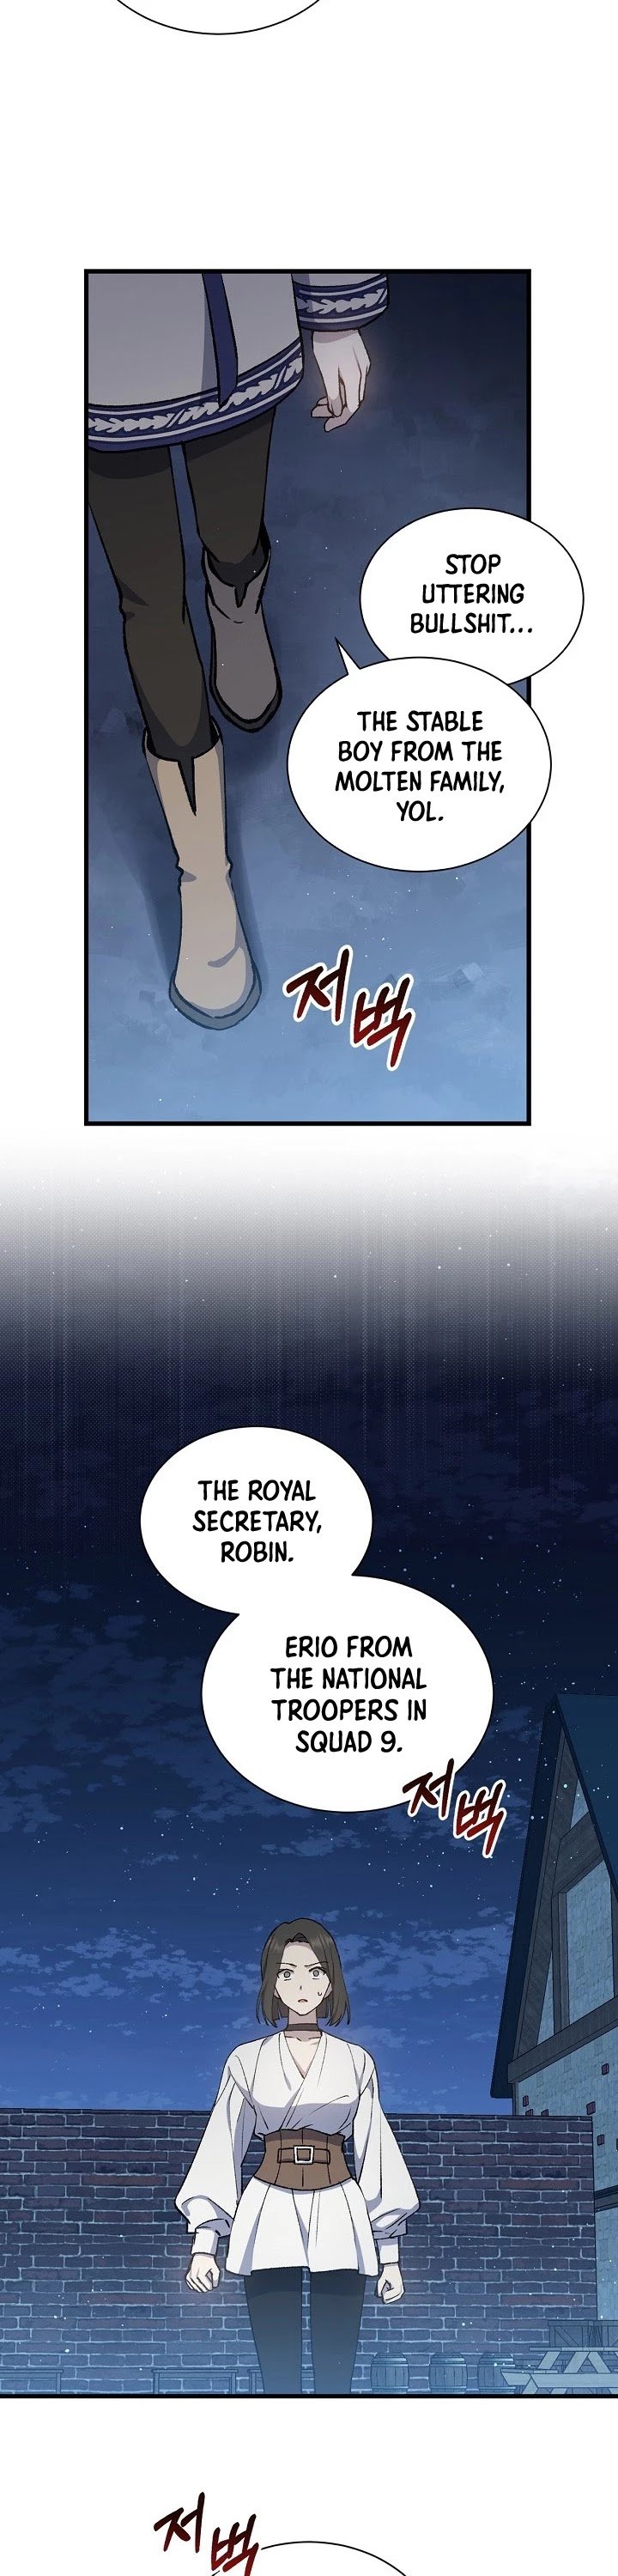 Return of the 8th class Magician chapter 10